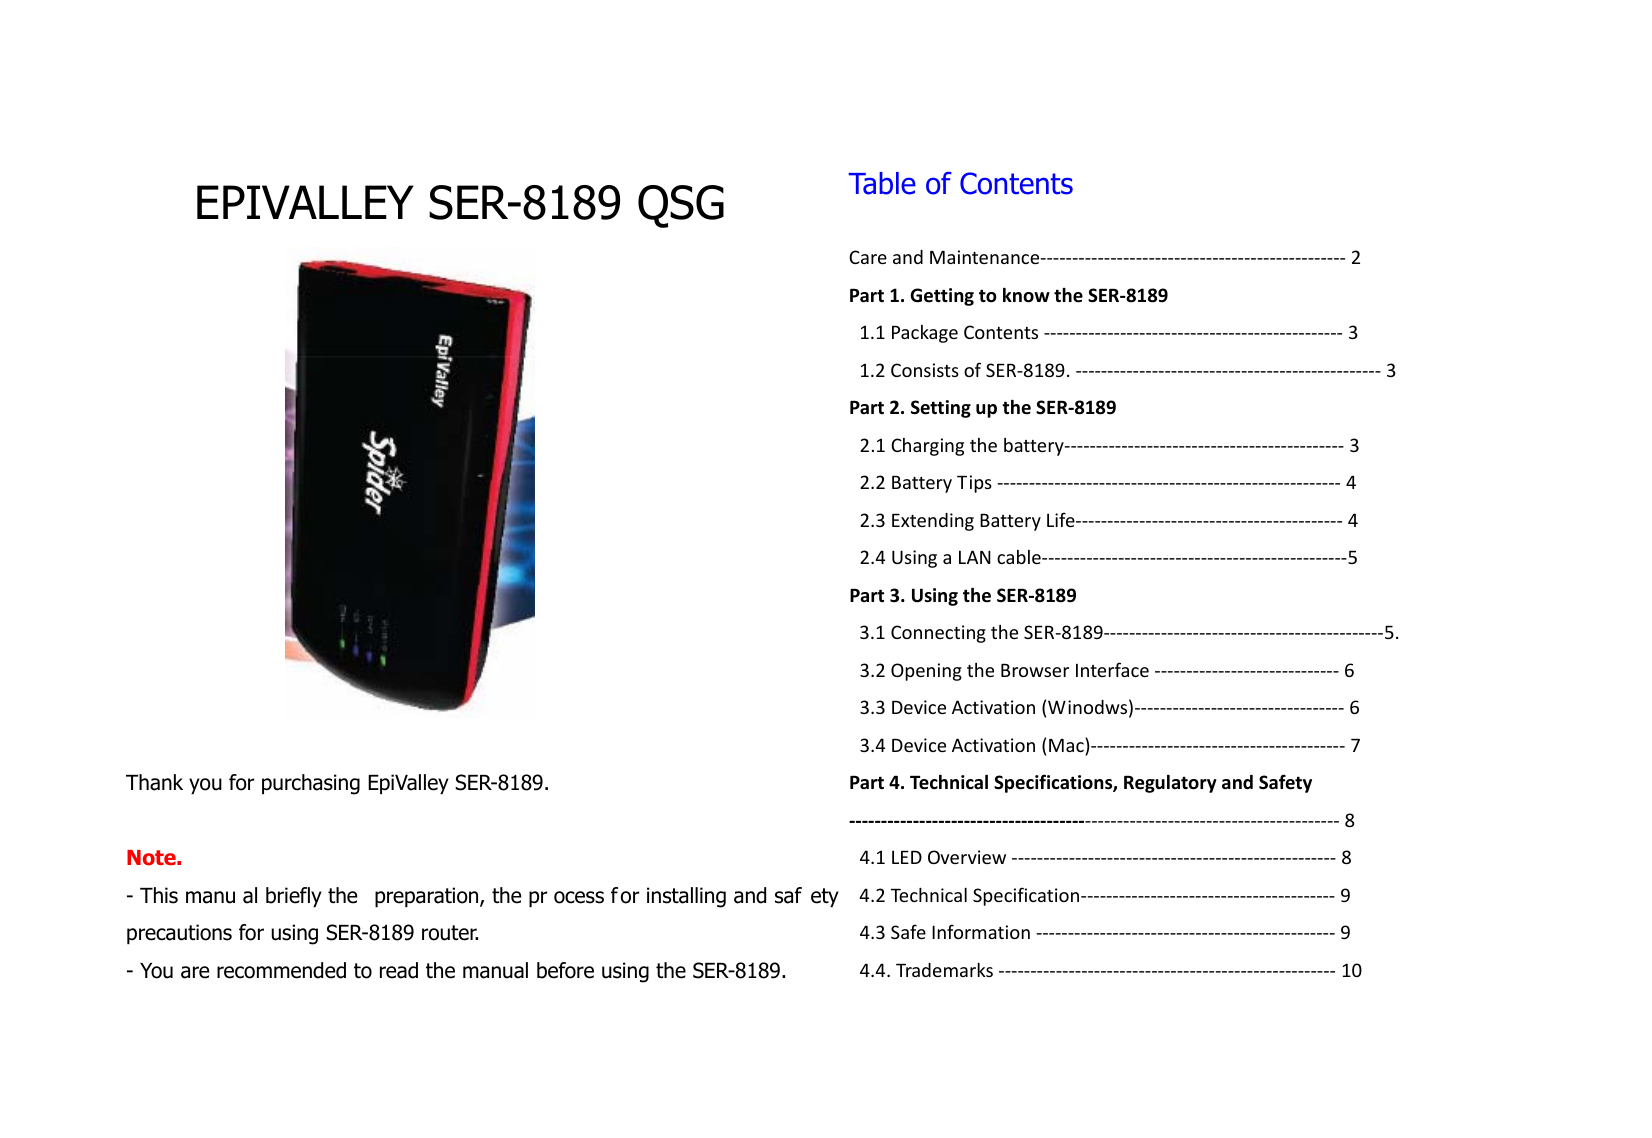  EPIVALLEY SER-8189 QSG   Thank you for purchasing EpiValley SER-8189.    Note.  - This manu al briefly the  preparation, the pr ocess f or installing and saf ety precautions for using SER-8189 router.   - You are recommended to read the manual before using the SER-8189.    Table of Contents  CareandMaintenance‐‐‐‐‐‐‐‐‐‐‐‐‐‐‐‐‐‐‐‐‐‐‐‐‐‐‐‐‐‐‐‐‐‐‐‐‐‐‐‐‐‐‐‐‐‐‐‐2Part1.GettingtoknowtheSER‐81891.1PackageContents‐‐‐‐‐‐‐‐‐‐‐‐‐‐‐‐‐‐‐‐‐‐‐‐‐‐‐‐‐‐‐‐‐‐‐‐‐‐‐‐‐‐‐‐‐‐‐31.2ConsistsofSER‐8189.‐‐‐‐‐‐‐‐‐‐‐‐‐‐‐‐‐‐‐‐‐‐‐‐‐‐‐‐‐‐‐‐‐‐‐‐‐‐‐‐‐‐‐‐‐‐‐‐3Part2.SettinguptheSER‐81892.1Chargingthebattery‐‐‐‐‐‐‐‐‐‐‐‐‐‐‐‐‐‐‐‐‐‐‐‐‐‐‐‐‐‐‐‐‐‐‐‐‐‐‐‐‐‐‐‐32.2BatteryTips‐‐‐‐‐‐‐‐‐‐‐‐‐‐‐‐‐‐‐‐‐‐‐‐‐‐‐‐‐‐‐‐‐‐‐‐‐‐‐‐‐‐‐‐‐‐‐‐‐‐‐‐‐‐42.3ExtendingBatteryLife‐‐‐‐‐‐‐‐‐‐‐‐‐‐‐‐‐‐‐‐‐‐‐‐‐‐‐‐‐‐‐‐‐‐‐‐‐‐‐‐‐‐42.4UsingaLANcable‐‐‐‐‐‐‐‐‐‐‐‐‐‐‐‐‐‐‐‐‐‐‐‐‐‐‐‐‐‐‐‐‐‐‐‐‐‐‐‐‐‐‐‐‐‐‐‐5Part3.UsingtheSER‐81893.1ConnectingtheSER‐8189‐‐‐‐‐‐‐‐‐‐‐‐‐‐‐‐‐‐‐‐‐‐‐‐‐‐‐‐‐‐‐‐‐‐‐‐‐‐‐‐‐‐‐‐5.3.2OpeningtheBrowserInterface‐‐‐‐‐‐‐‐‐‐‐‐‐‐‐‐‐‐‐‐‐‐‐‐‐‐‐‐‐63.3DeviceActivation(Winodws)‐‐‐‐‐‐‐‐‐‐‐‐‐‐‐‐‐‐‐‐‐‐‐‐‐‐‐‐‐‐‐‐‐63.4DeviceActivation(Mac)‐‐‐‐‐‐‐‐‐‐‐‐‐‐‐‐‐‐‐‐‐‐‐‐‐‐‐‐‐‐‐‐‐‐‐‐‐‐‐‐7Part4.TechnicalSpecifications,RegulatoryandSafety‐‐‐‐‐‐‐‐‐‐‐‐‐‐‐‐‐‐‐‐‐‐‐‐‐‐‐‐‐‐‐‐‐‐‐‐‐‐‐‐‐‐‐‐‐‐‐‐‐‐‐‐‐‐‐‐‐‐‐‐‐‐‐‐‐‐‐‐‐‐‐‐‐‐‐‐‐84.1LEDOverview‐‐‐‐‐‐‐‐‐‐‐‐‐‐‐‐‐‐‐‐‐‐‐‐‐‐‐‐‐‐‐‐‐‐‐‐‐‐‐‐‐‐‐‐‐‐‐‐‐‐‐84.2TechnicalSpecification‐‐‐‐‐‐‐‐‐‐‐‐‐‐‐‐‐‐‐‐‐‐‐‐‐‐‐‐‐‐‐‐‐‐‐‐‐‐‐‐94.3SafeInformation‐‐‐‐‐‐‐‐‐‐‐‐‐‐‐‐‐‐‐‐‐‐‐‐‐‐‐‐‐‐‐‐‐‐‐‐‐‐‐‐‐‐‐‐‐‐‐94.4.Trademarks‐‐‐‐‐‐‐‐‐‐‐‐‐‐‐‐‐‐‐‐‐‐‐‐‐‐‐‐‐‐‐‐‐‐‐‐‐‐‐‐‐‐‐‐‐‐‐‐‐‐‐‐‐10